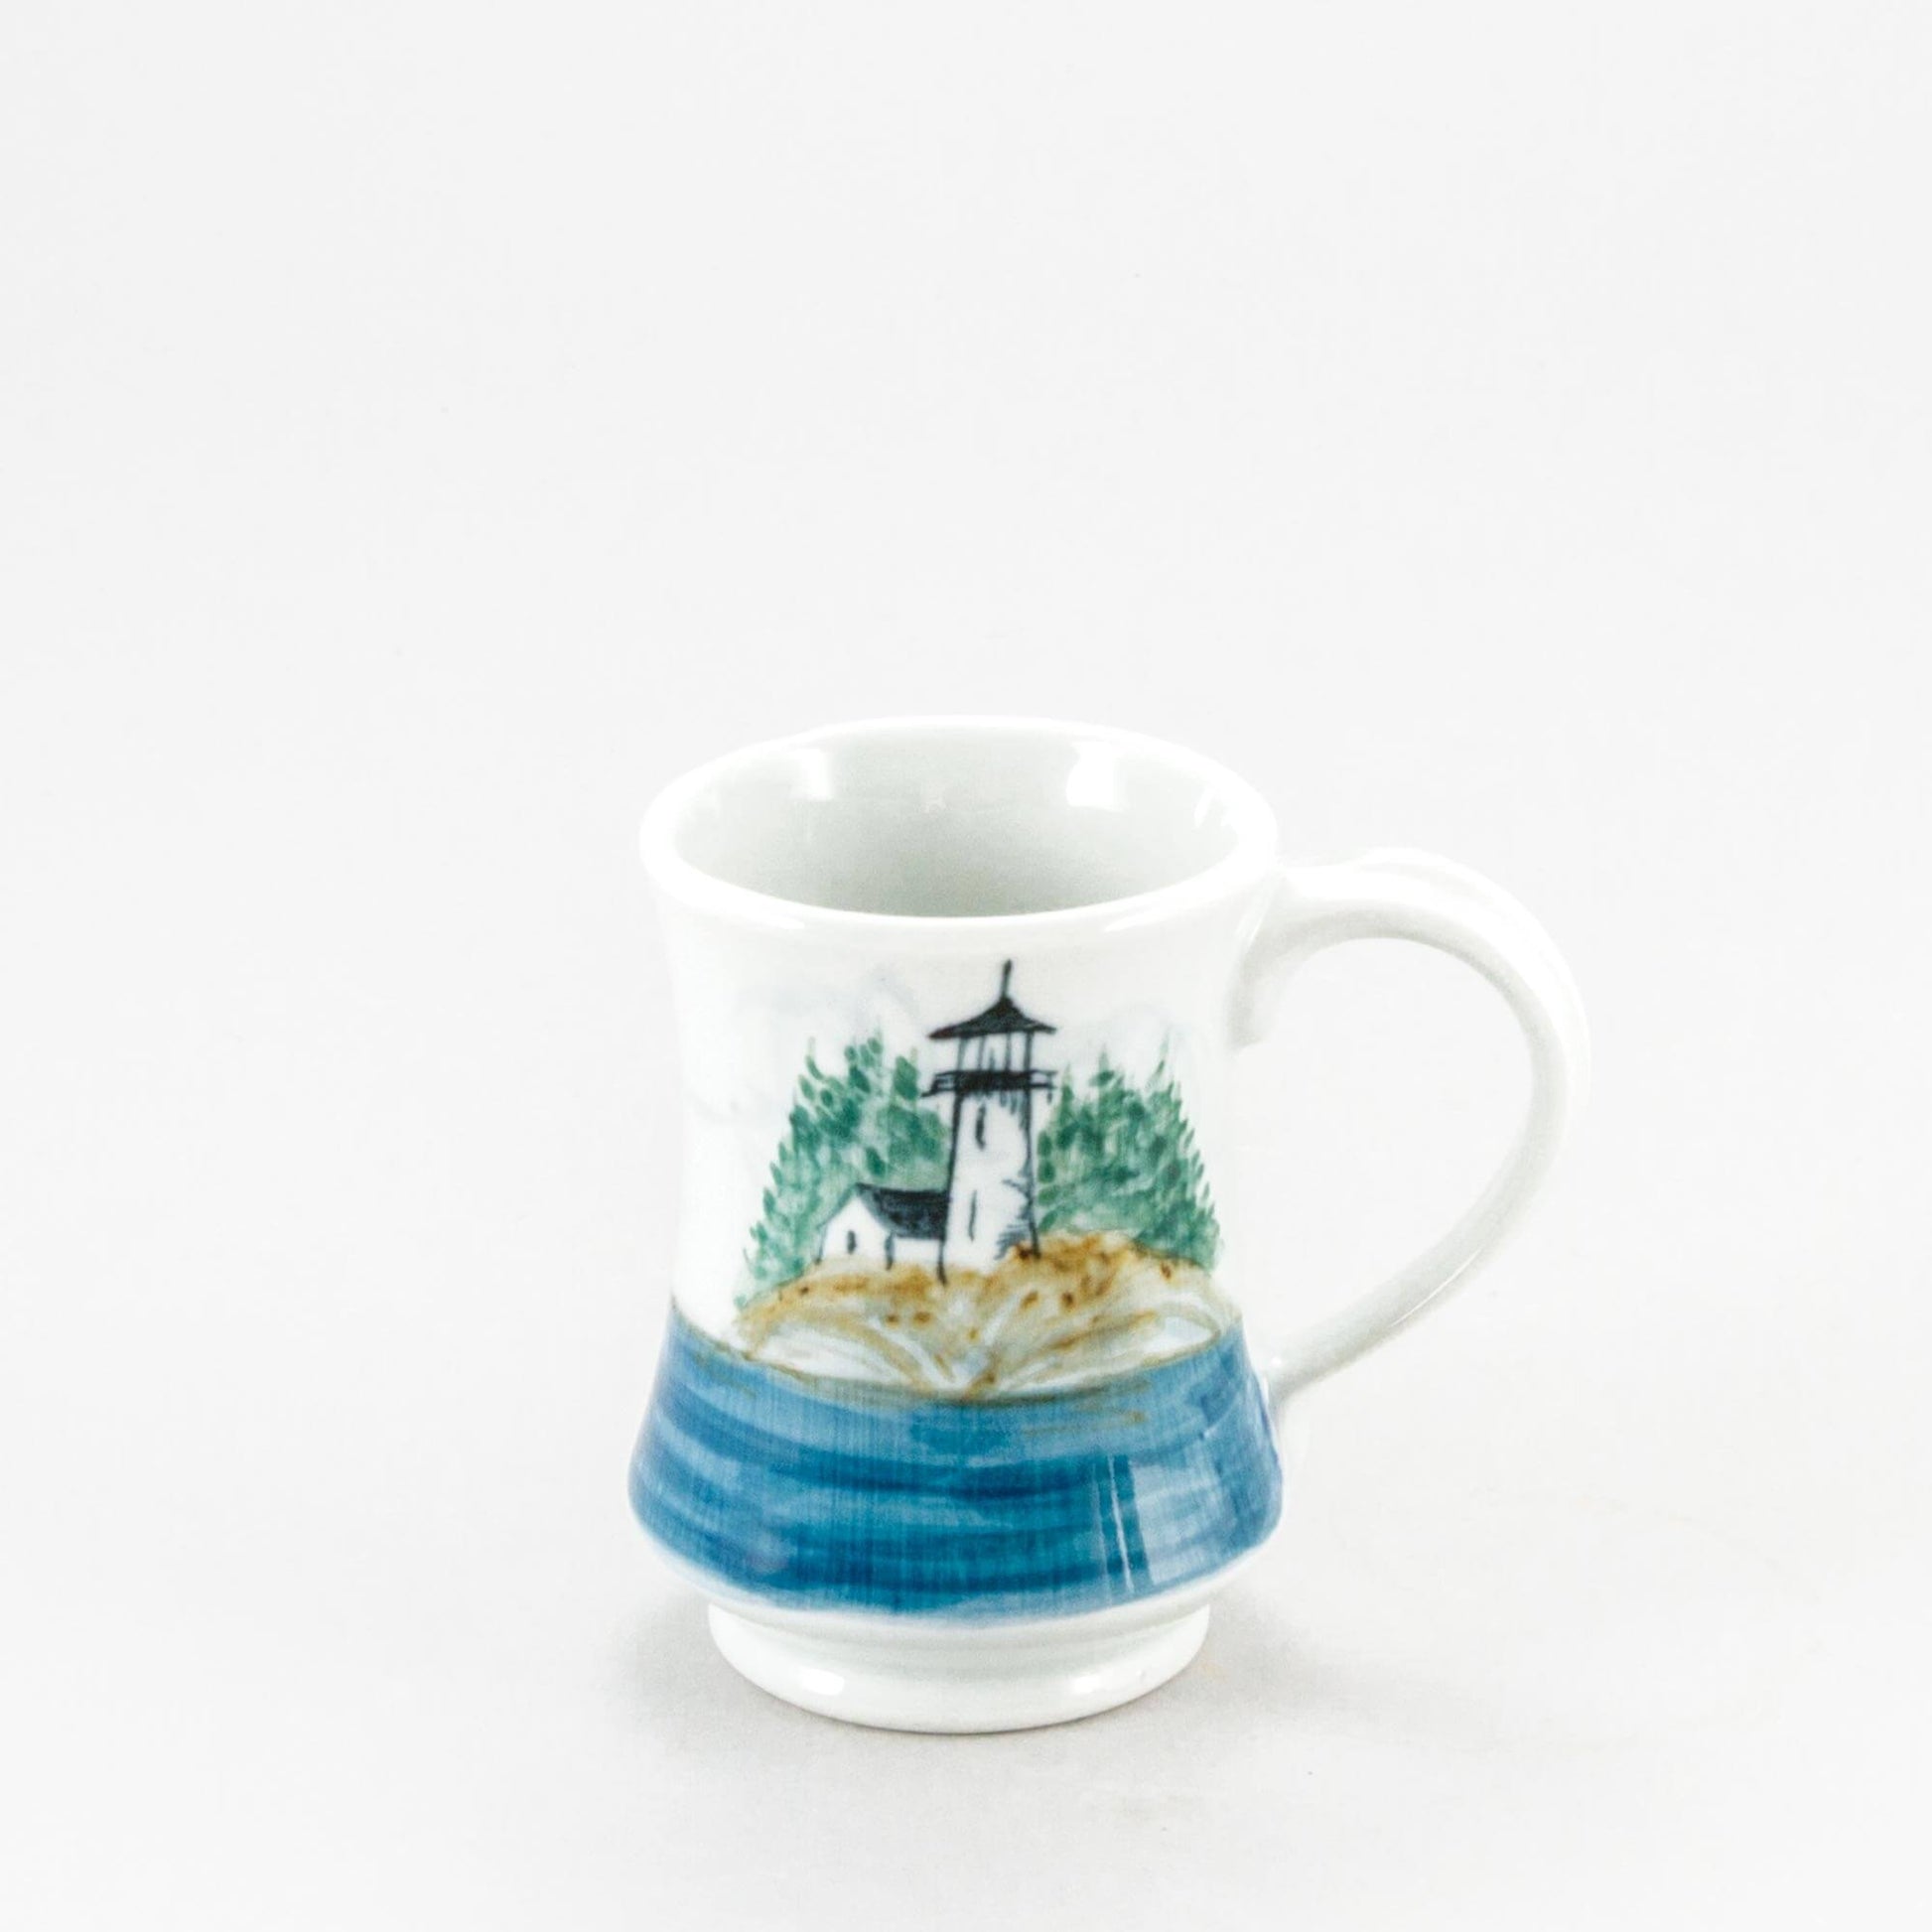 Handmade Pottery Pedestal Mug made by Georgetown Pottery in Maine Lighthouse